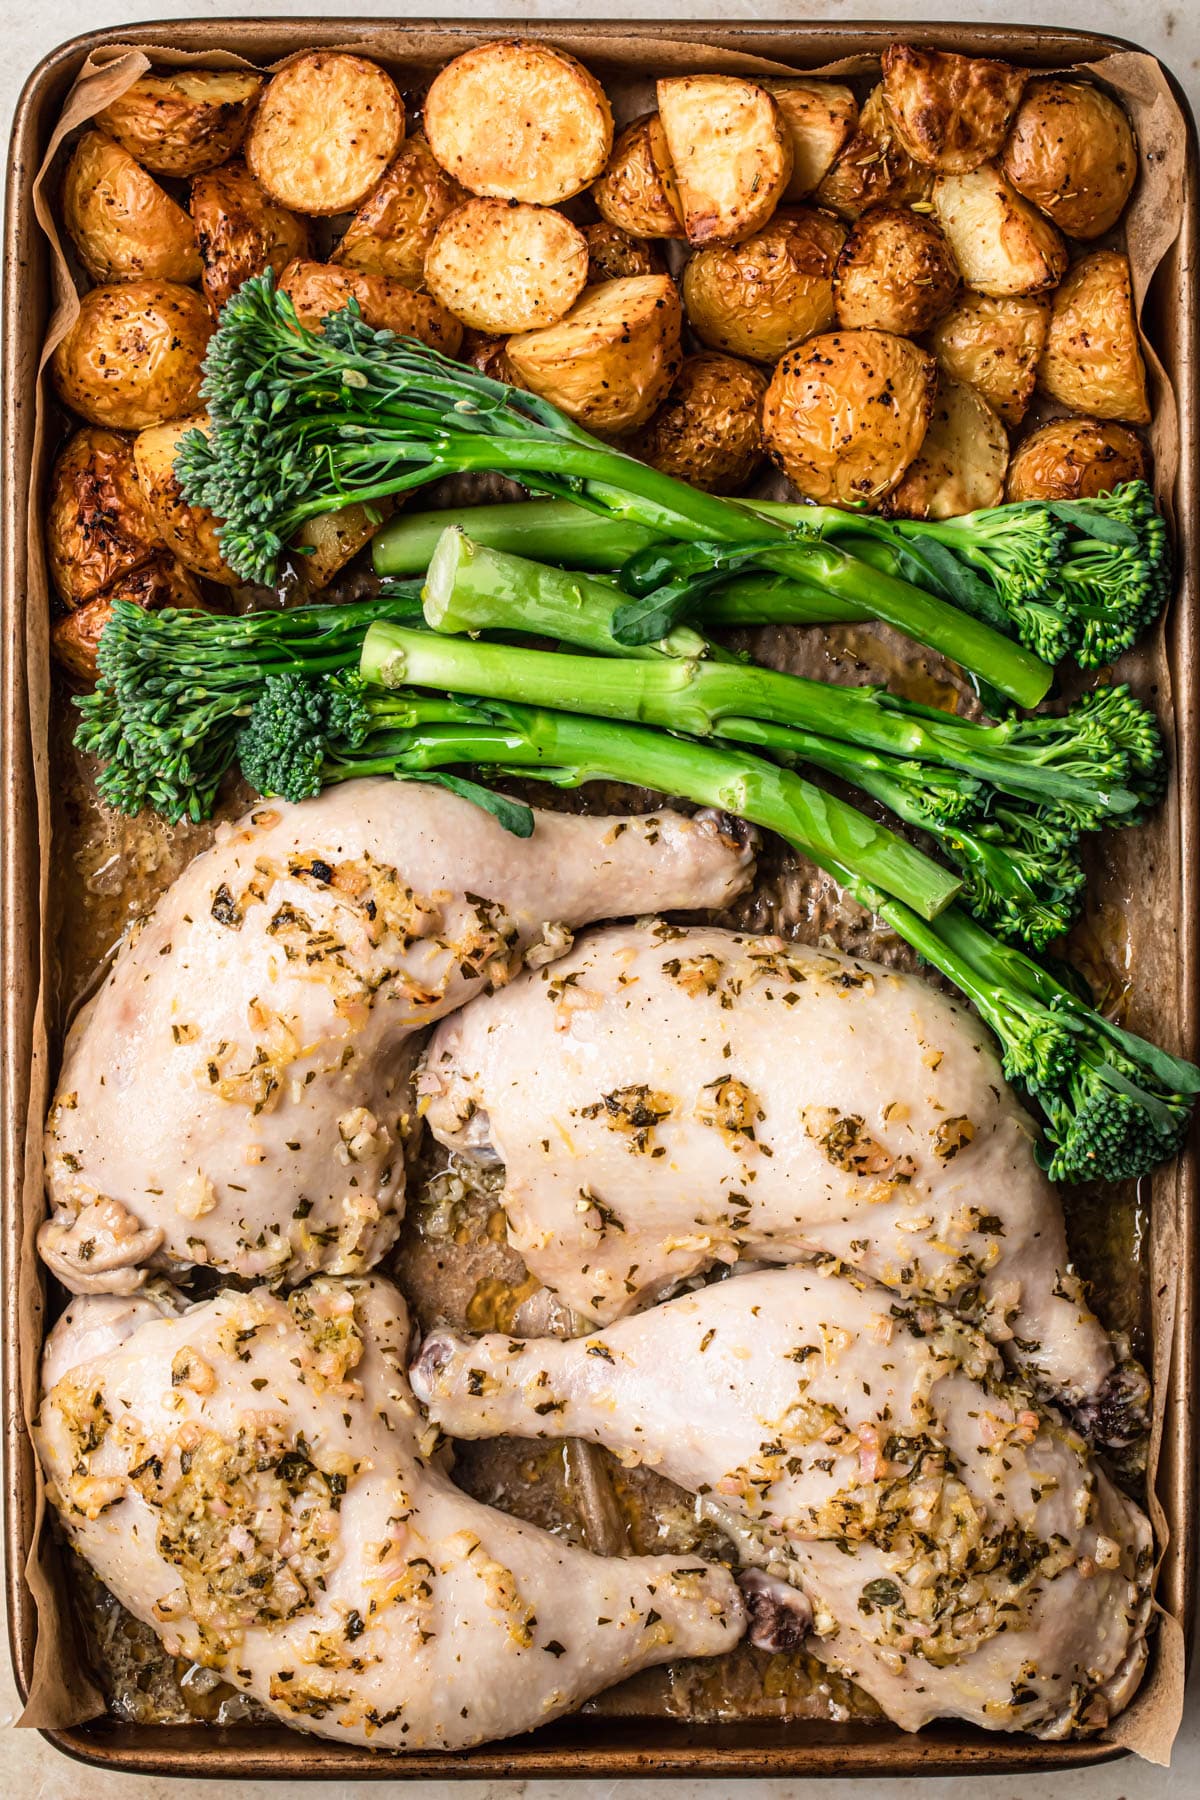 Marinated chicken, broccolini and roasted potatoes on a tray.